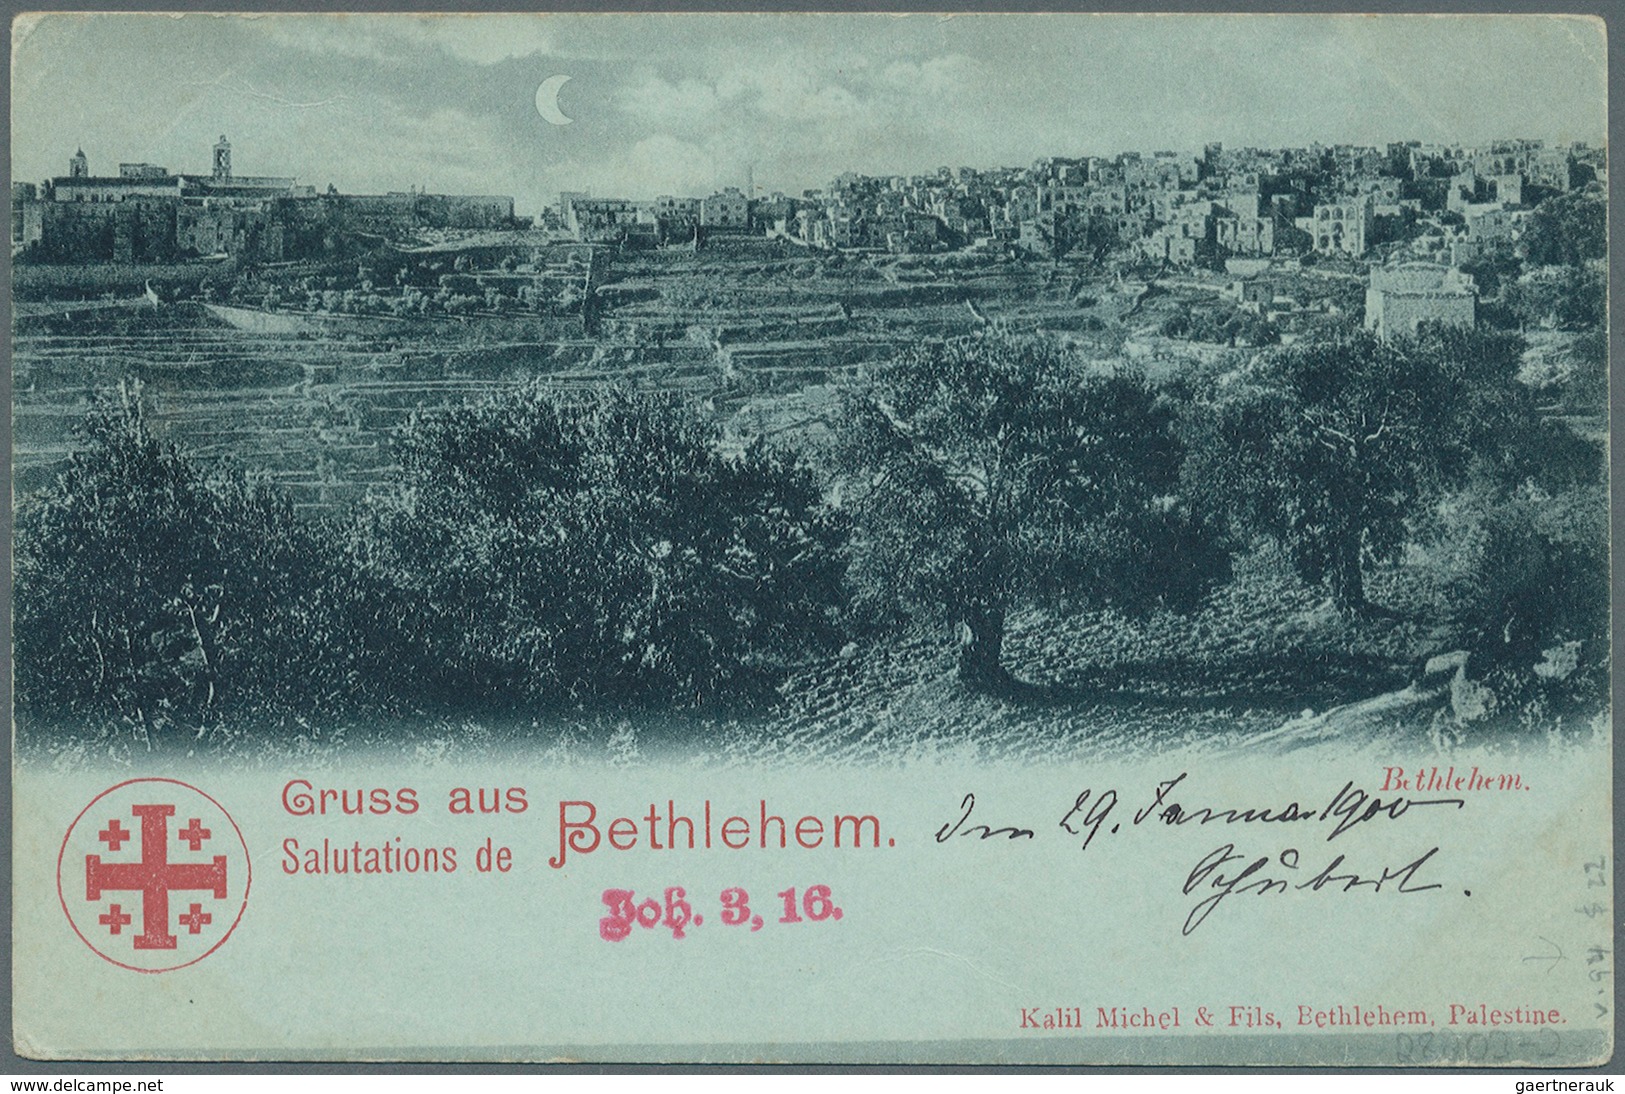 08544 Holyland: 1899-1911, Two Picture Postcards (Greetings From Bethlehem; Imperial Camp Jerusalem) To Ge - Palästina